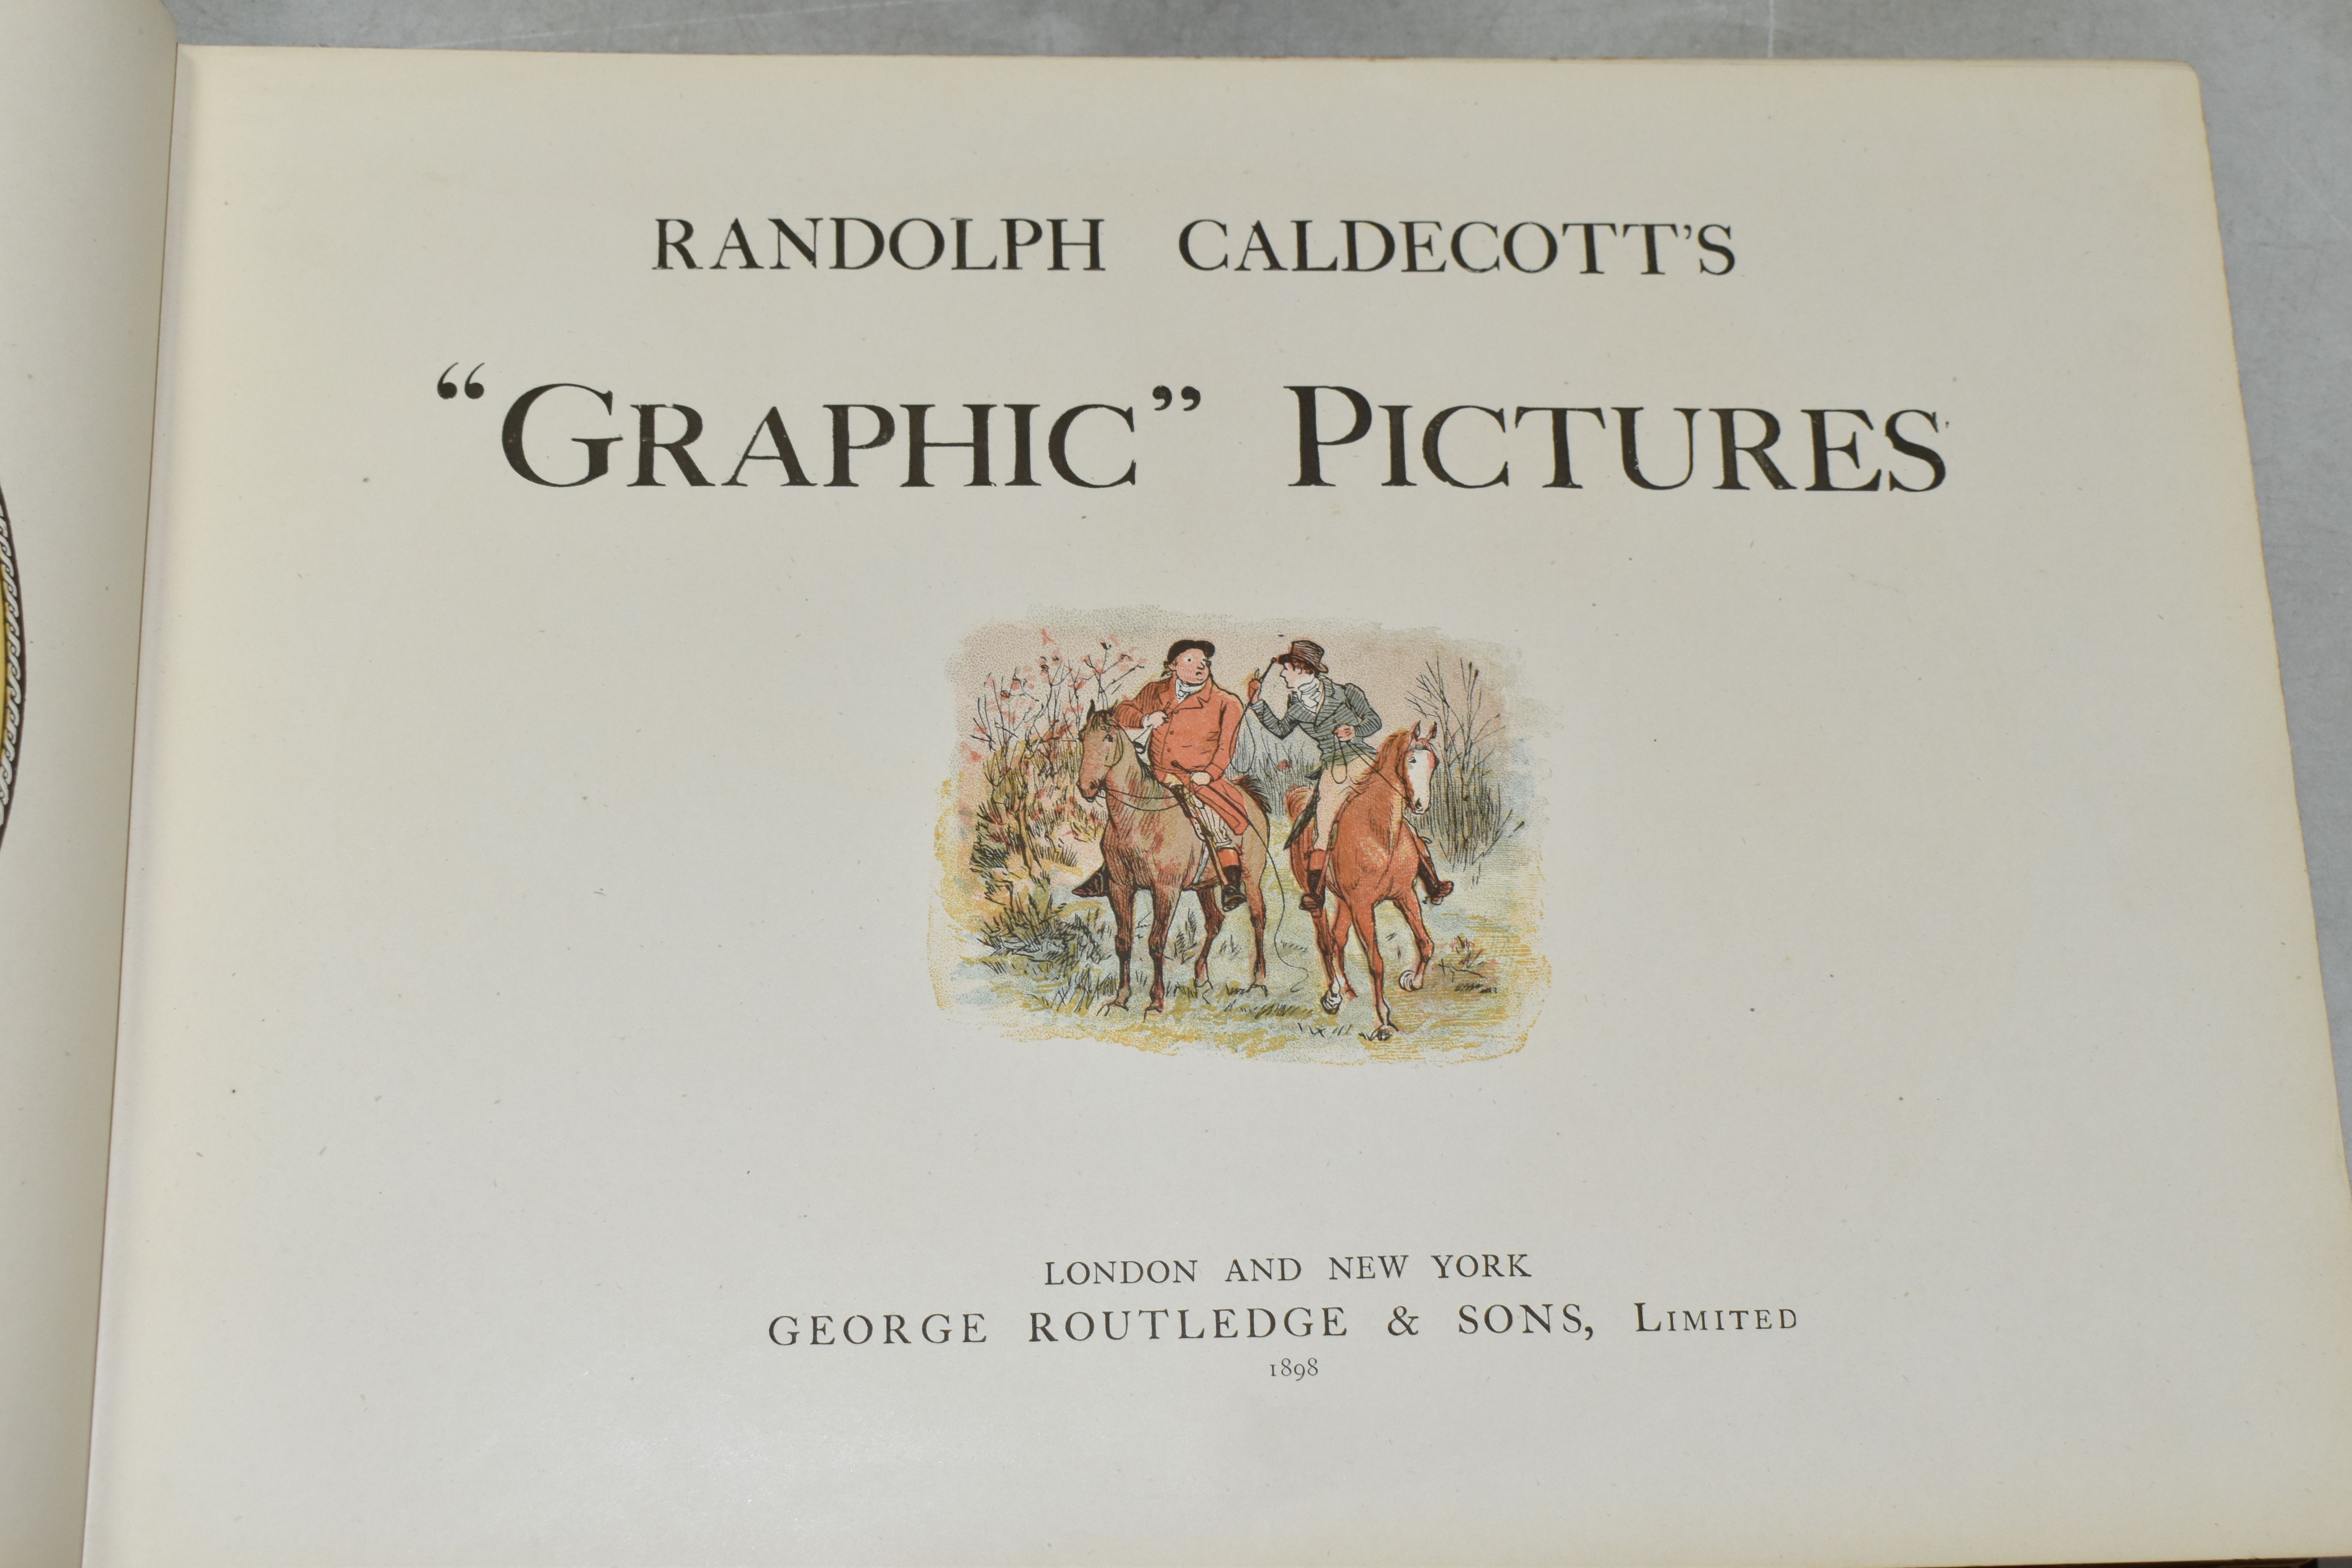 RANDOLPH CALDECOTT'S 'GRAPHIC' PICTURES, Complete Edition, published by George Routledge & Sons (1) - Image 4 of 16